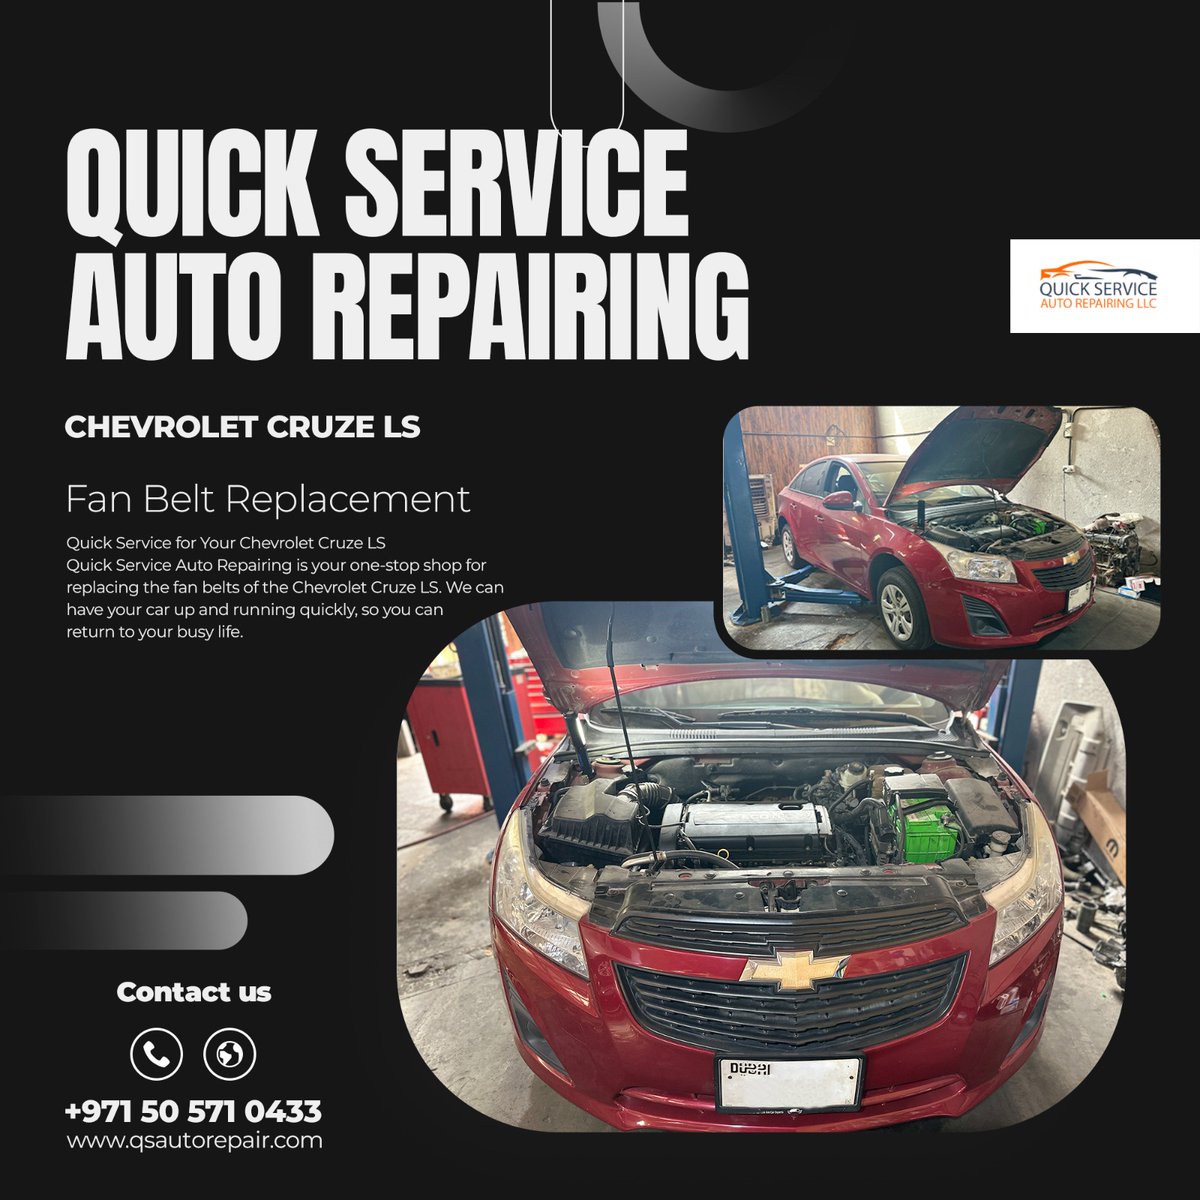 Quick Service Auto Repairing is your one-stop shop for replacing the fan belts of the Chevrolet Cruze LS. We can have your car up and running quickly, so you can return to your busy life.

#Chevrolet #automechanic #carrepairshop #autorepairdubai #autogarage #enginerepair